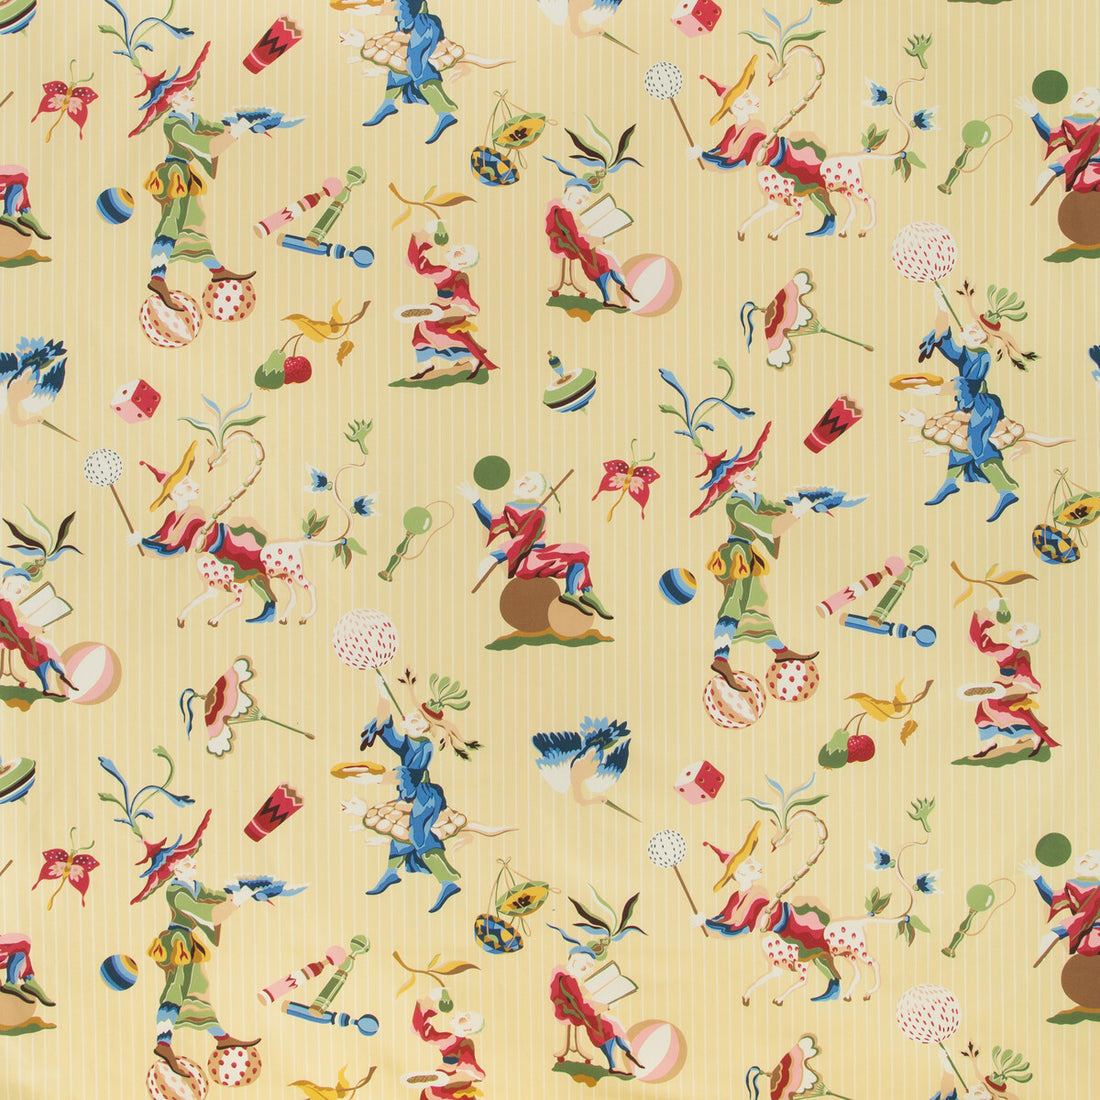 Cirque Chinois Print fabric in sun color - pattern 8019141.143.0 - by Brunschwig &amp; Fils in the Summer Palace collection